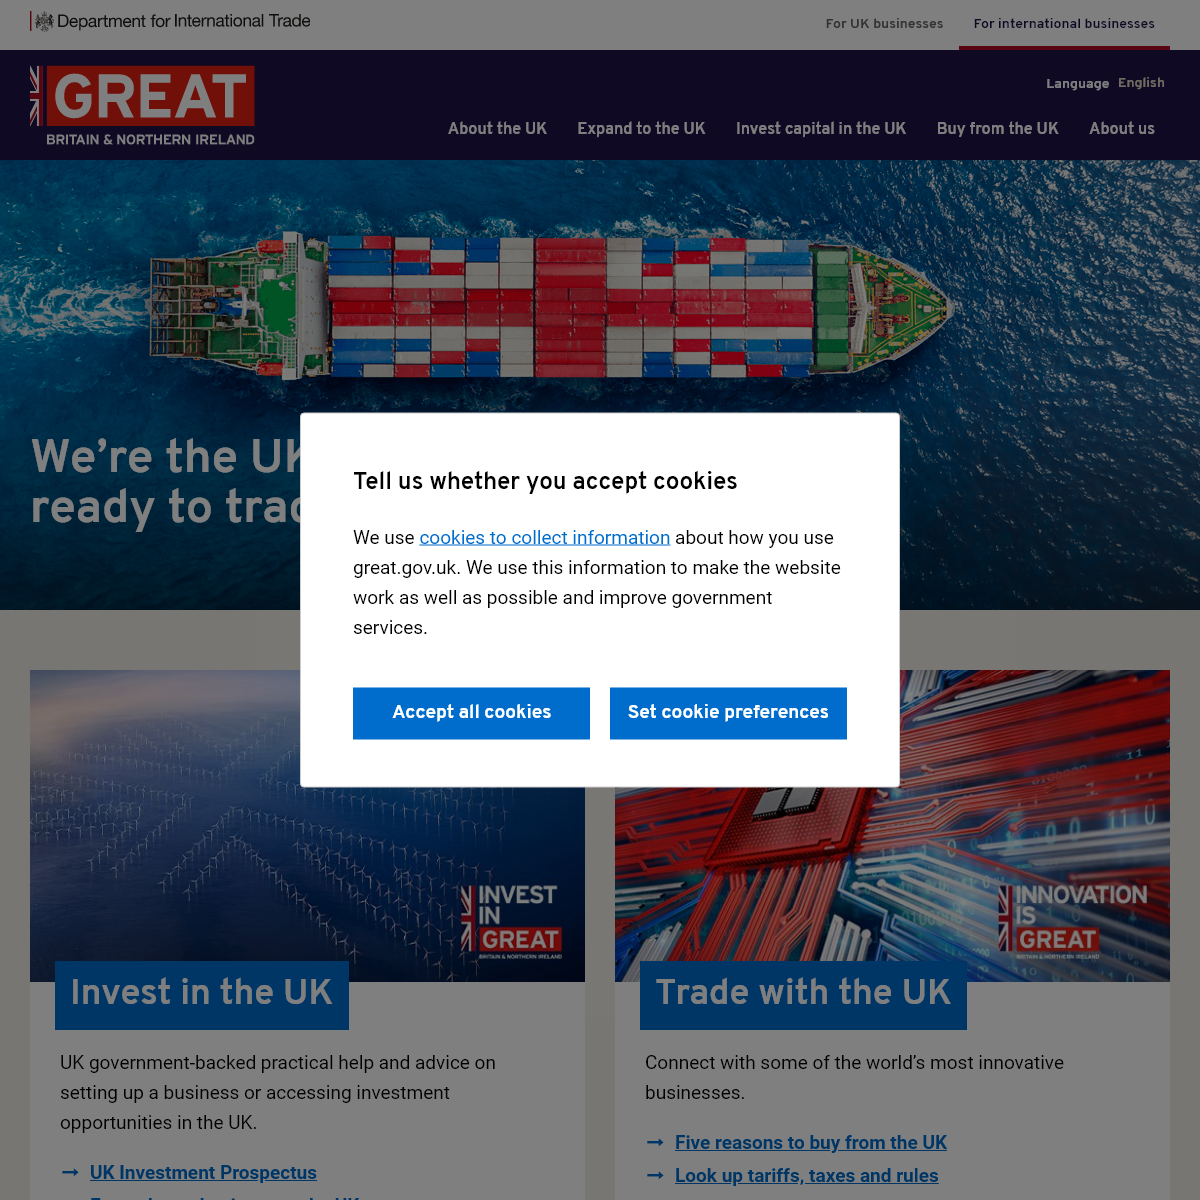 A complete backup of exportingisgreat.gov.uk